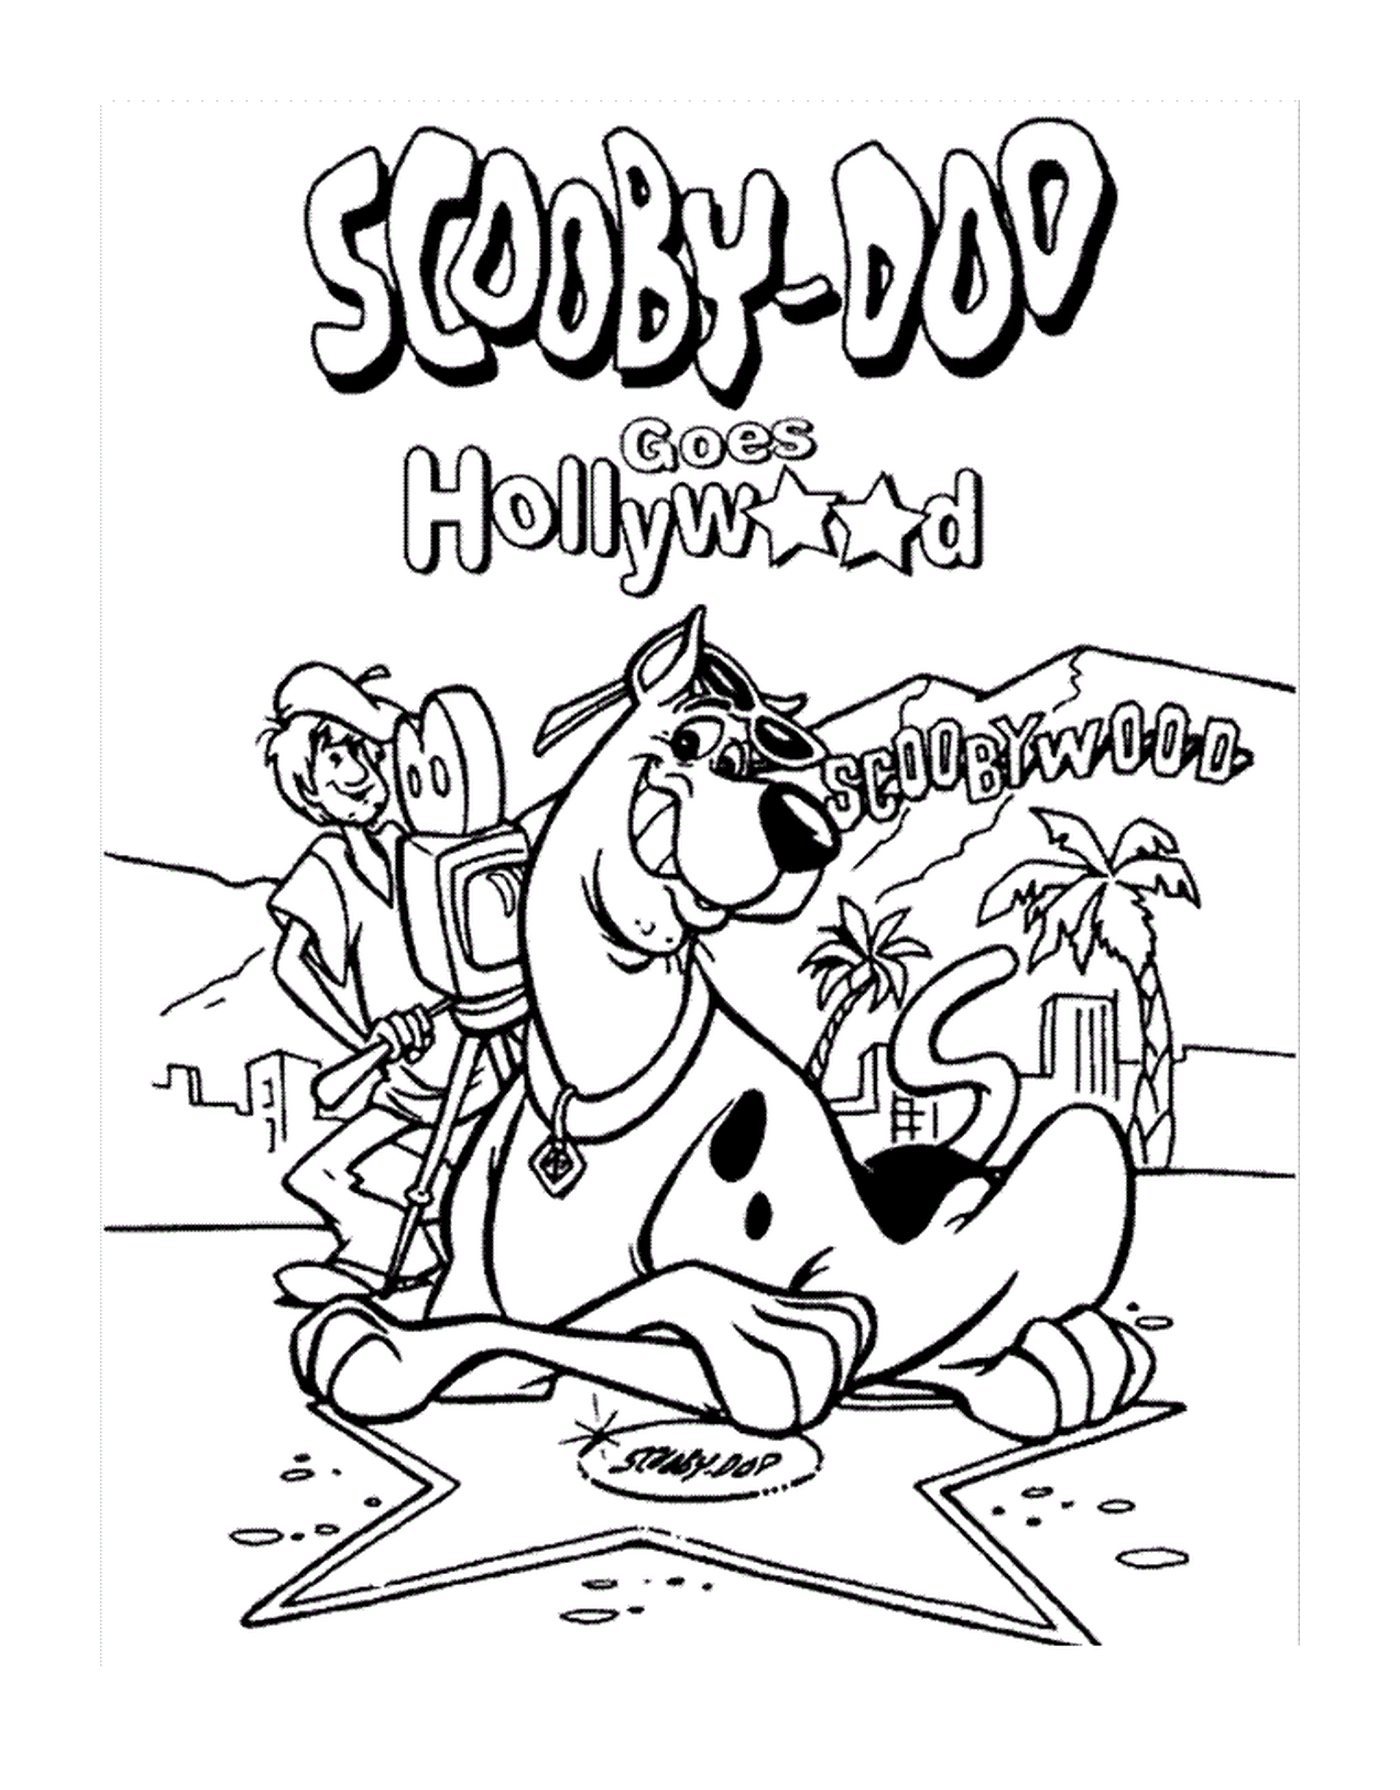   Scooby Doo à Hollywood 